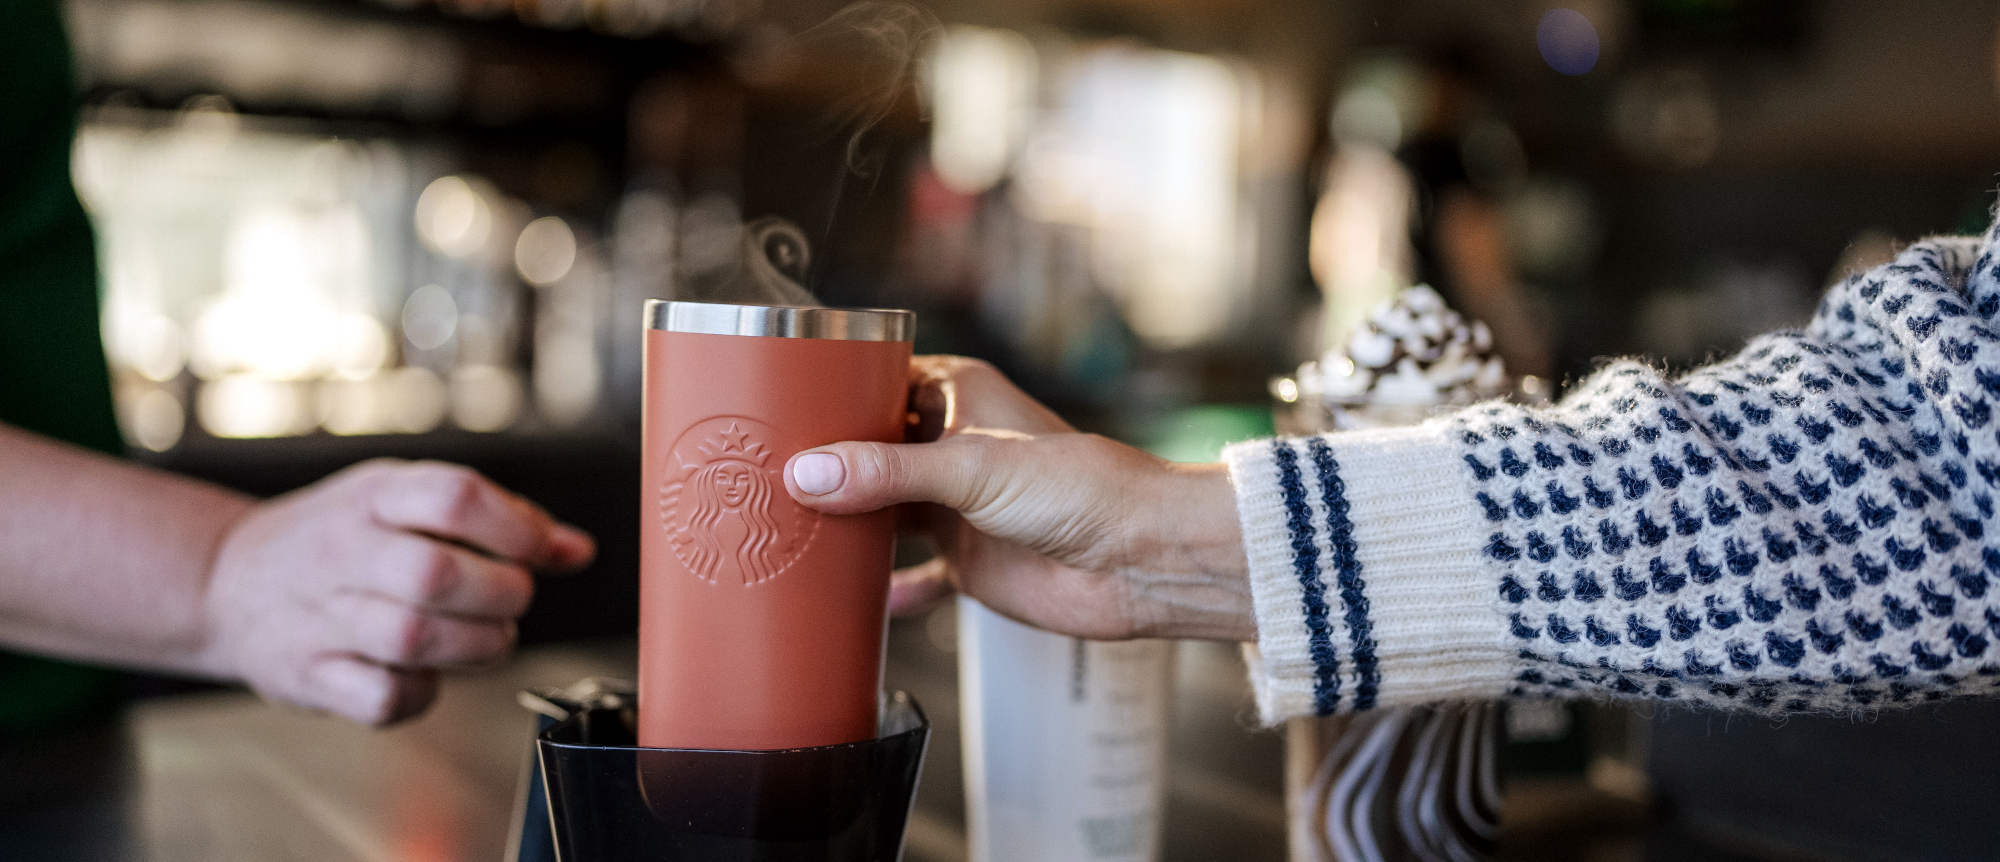 Starbucks Becomes First National Coffee Retailer to Accept Reusable, Personal Cups at Every Visit